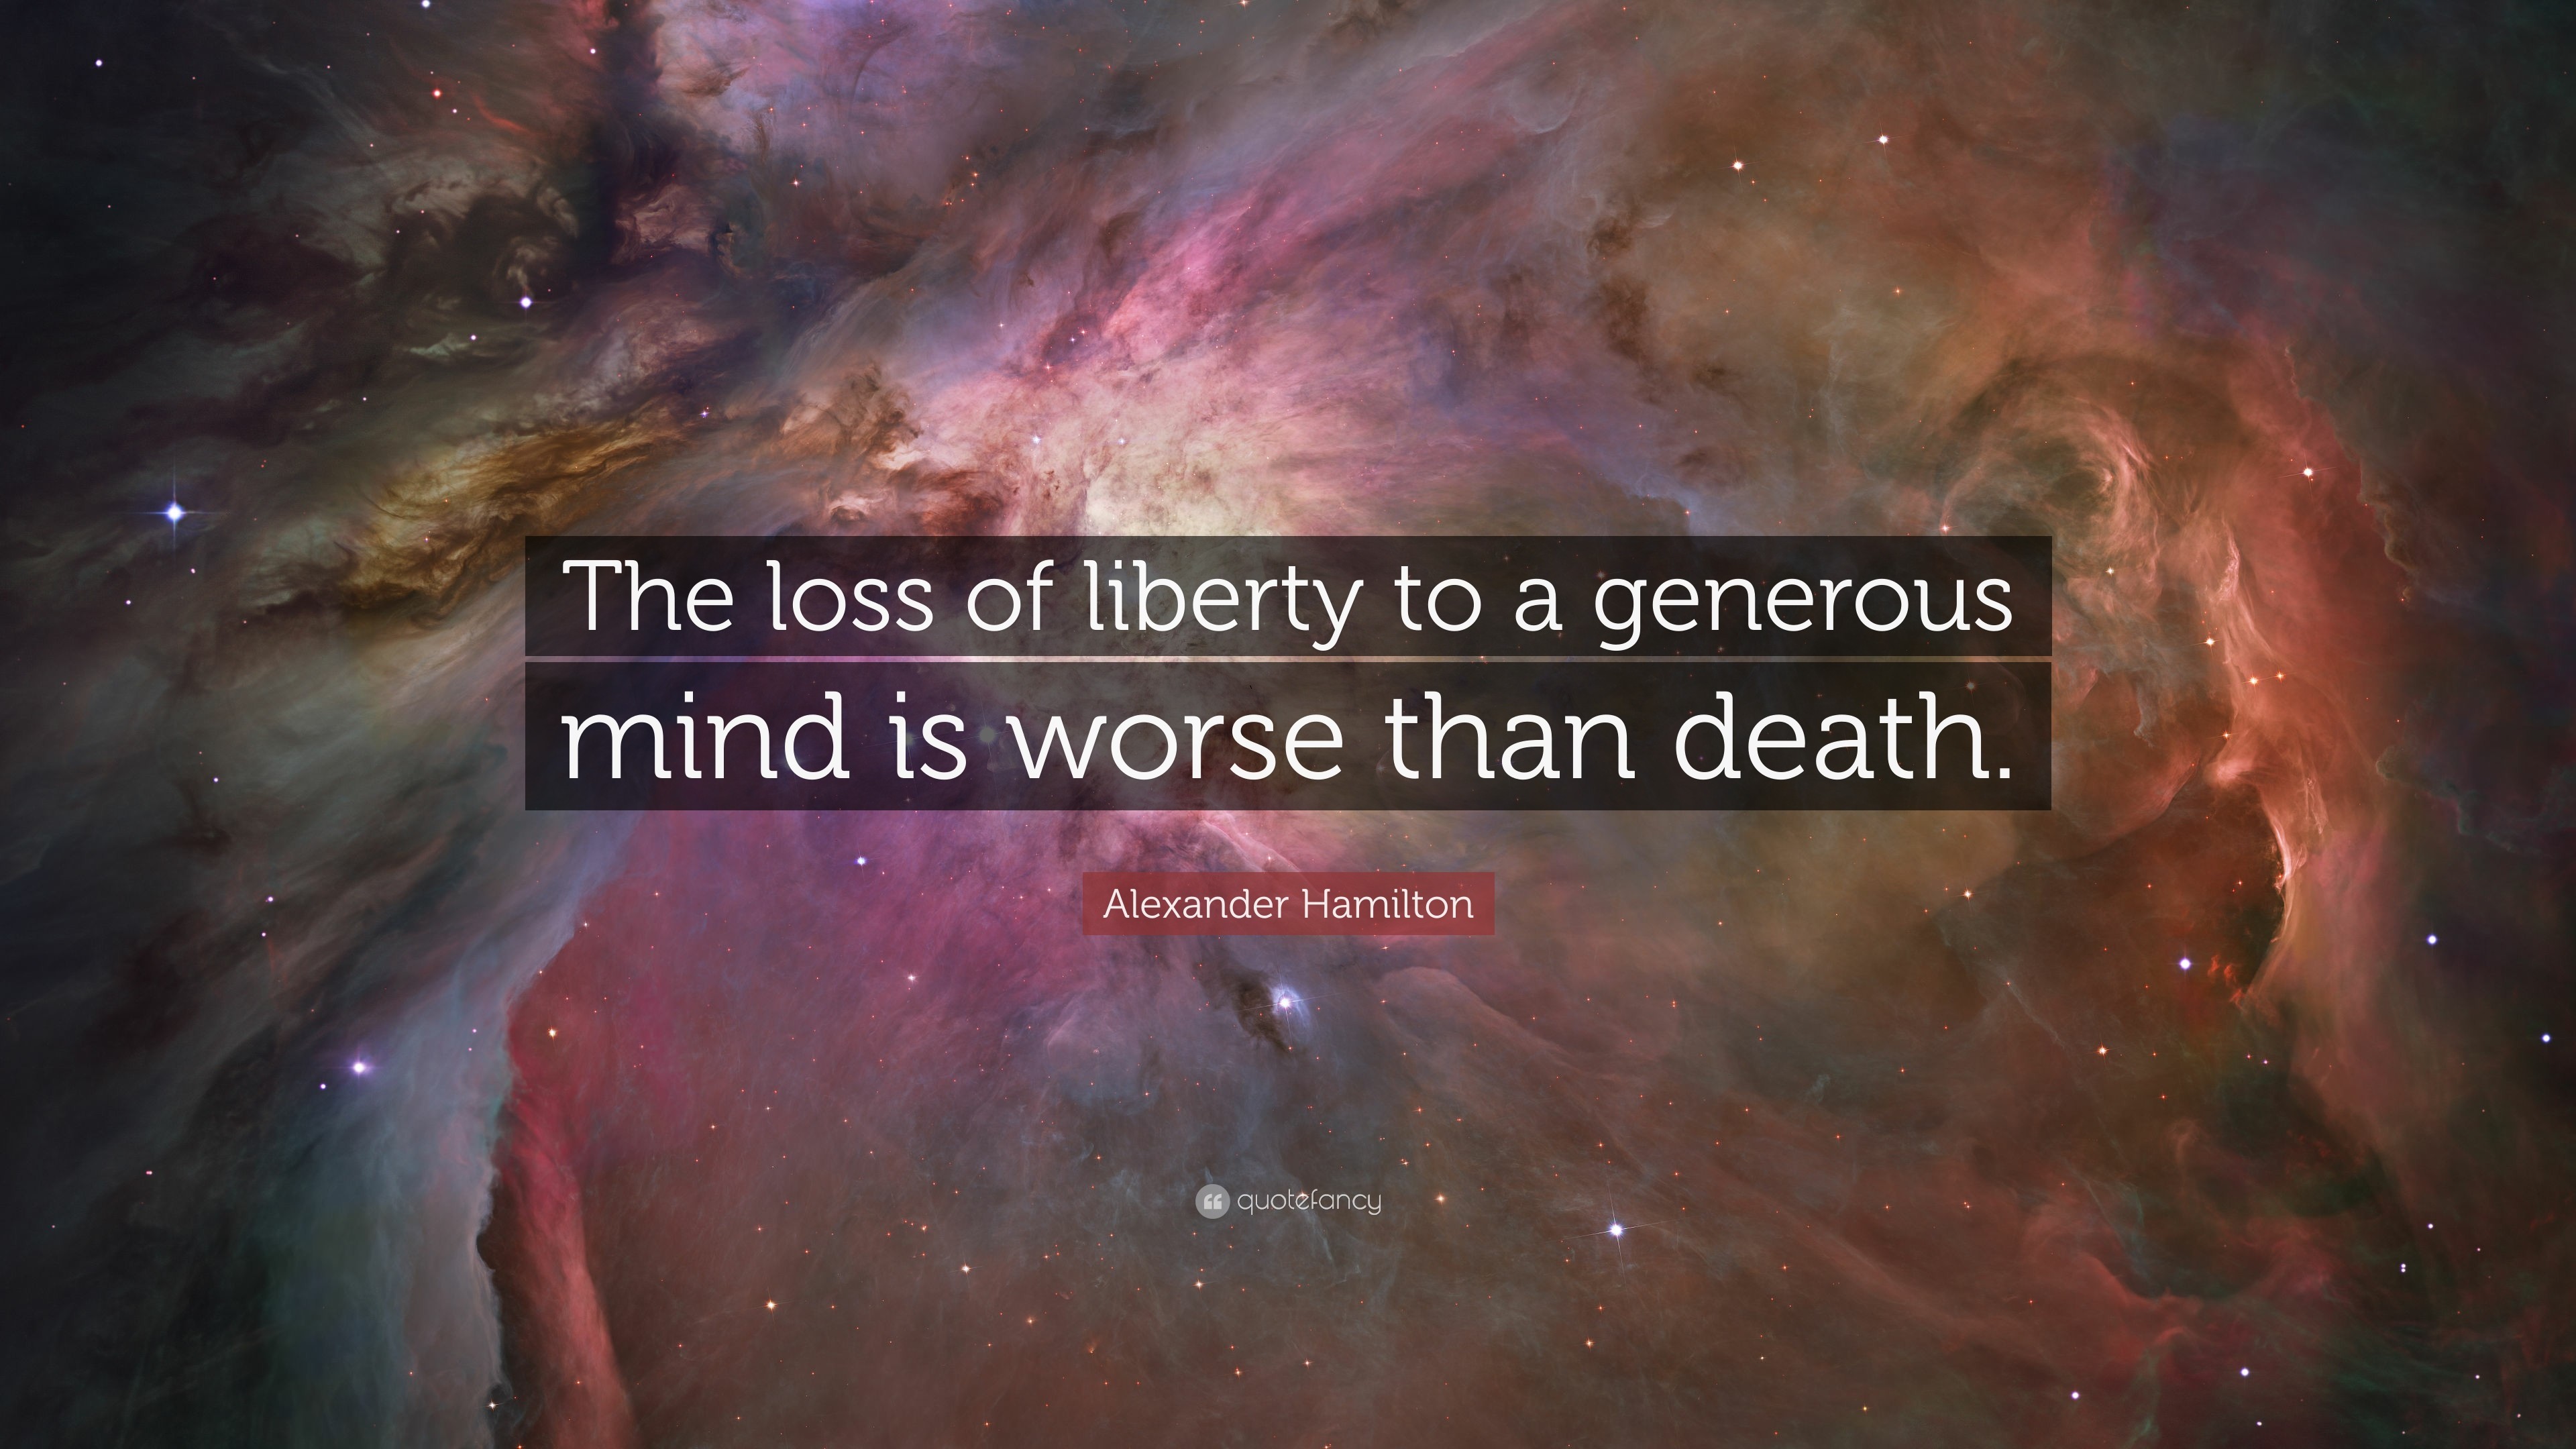 Alexander Hamilton Quote The loss of liberty to a generous mind is worse than